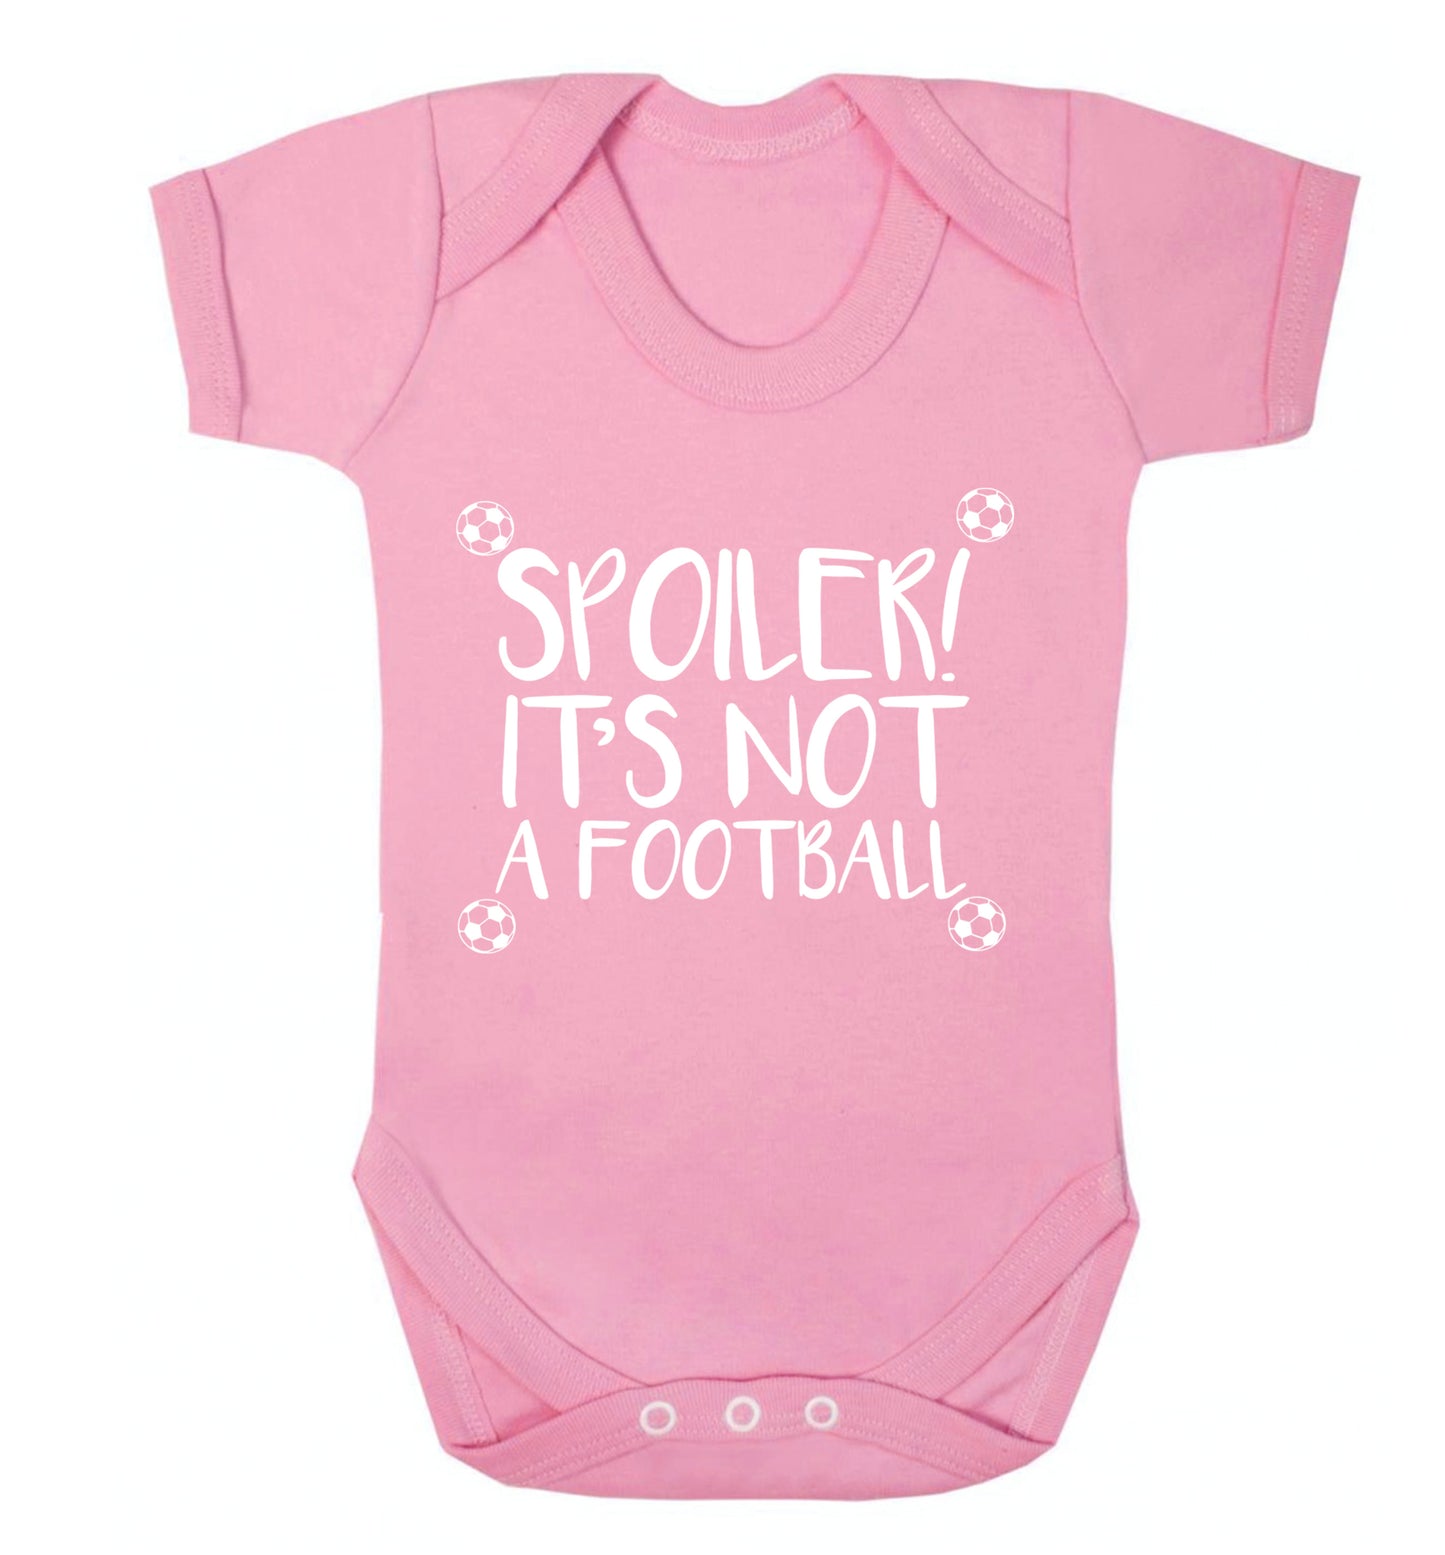 Spoiler it's not a football Baby Vest pale pink 18-24 months